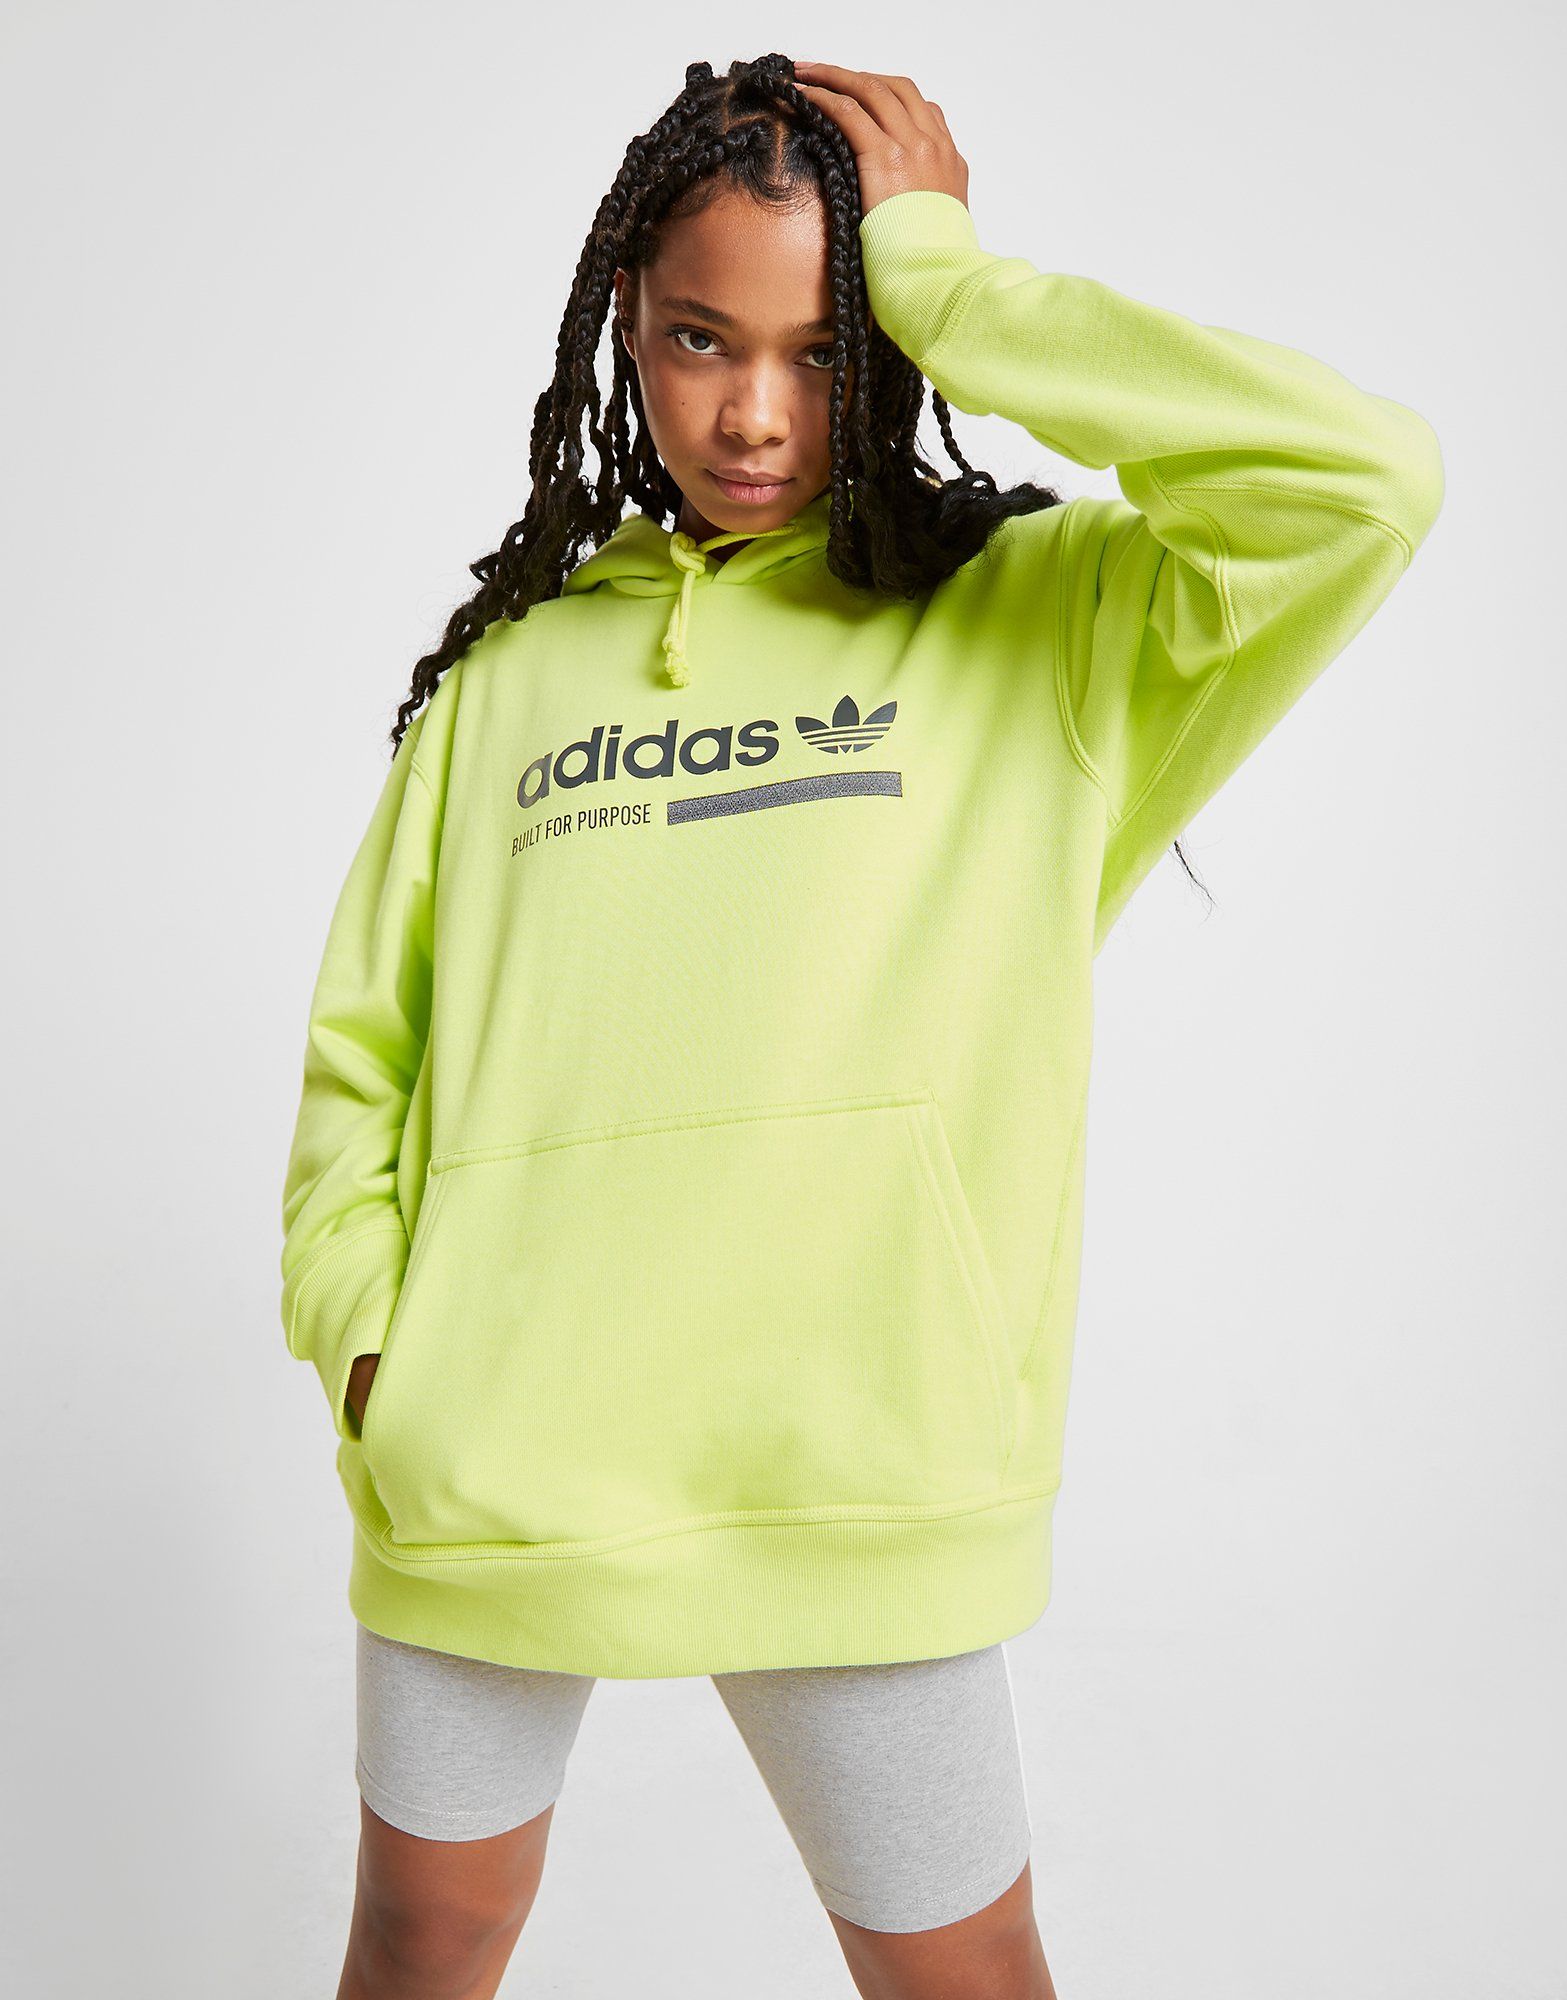 Neon Green Adidas Hoodie On Sale F1a11 F91a2 - black jacket with neon green hoodie roblox